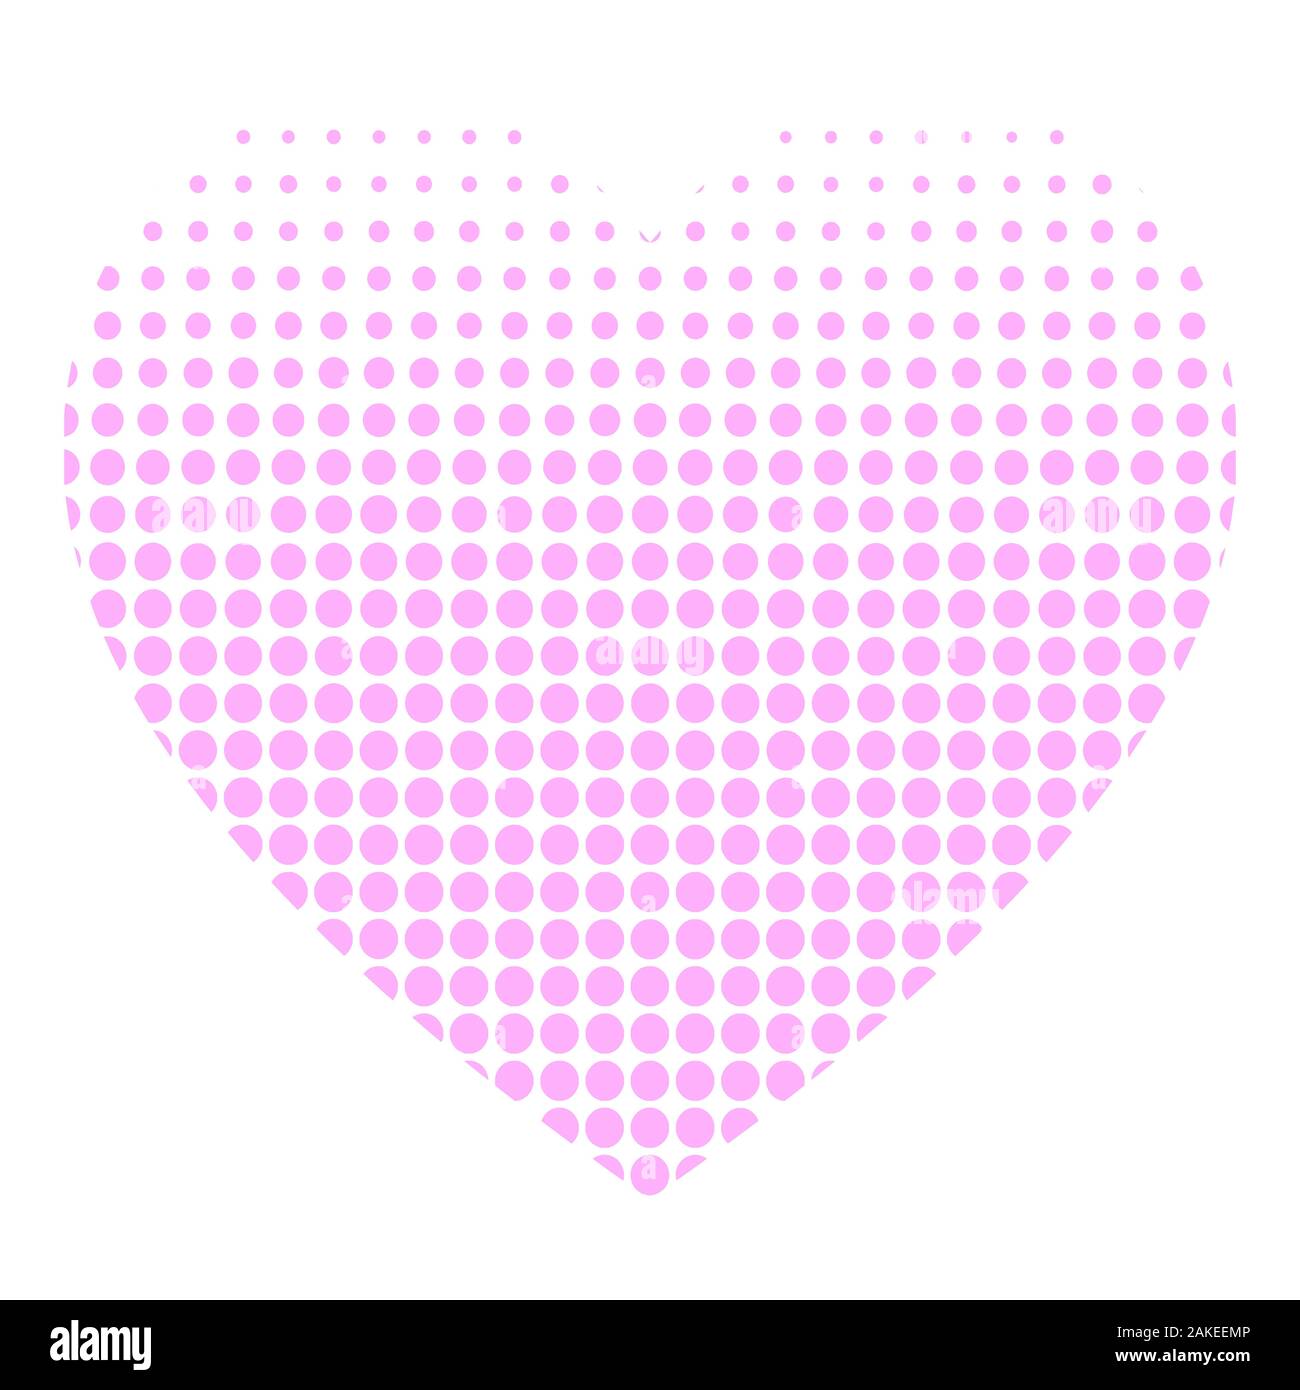 Valentines day card, dotted vector illustration. Web design, wallpaper, flyers, invitation, posters, brochure, banners. Stock Vector